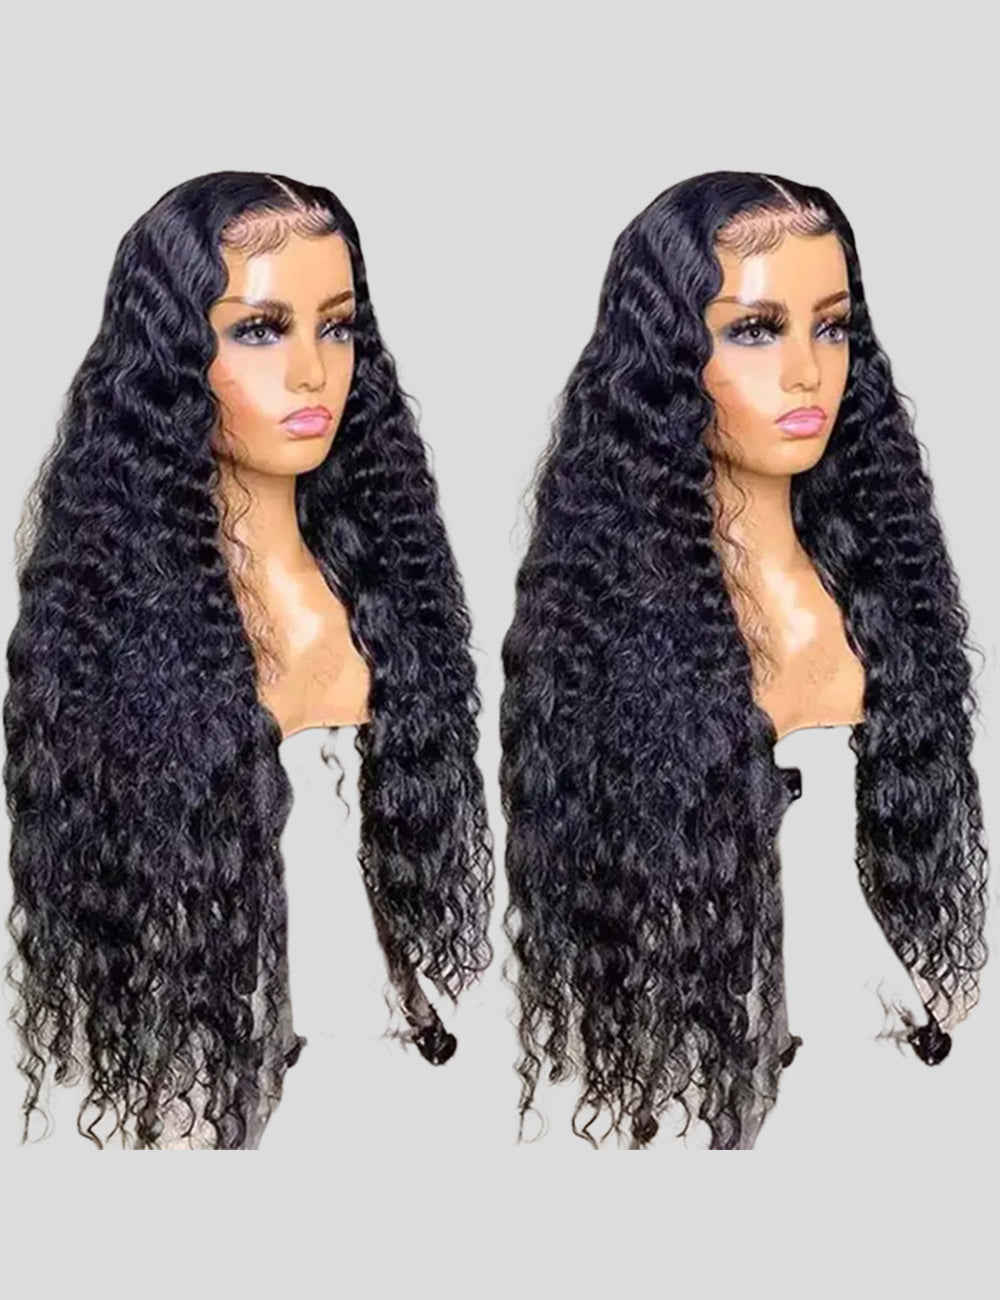 【HD Invisible Lace】Undetectable HD Lace Wig Water Wave Human Hair Wig 13*6 Invisible Lace Front Wig